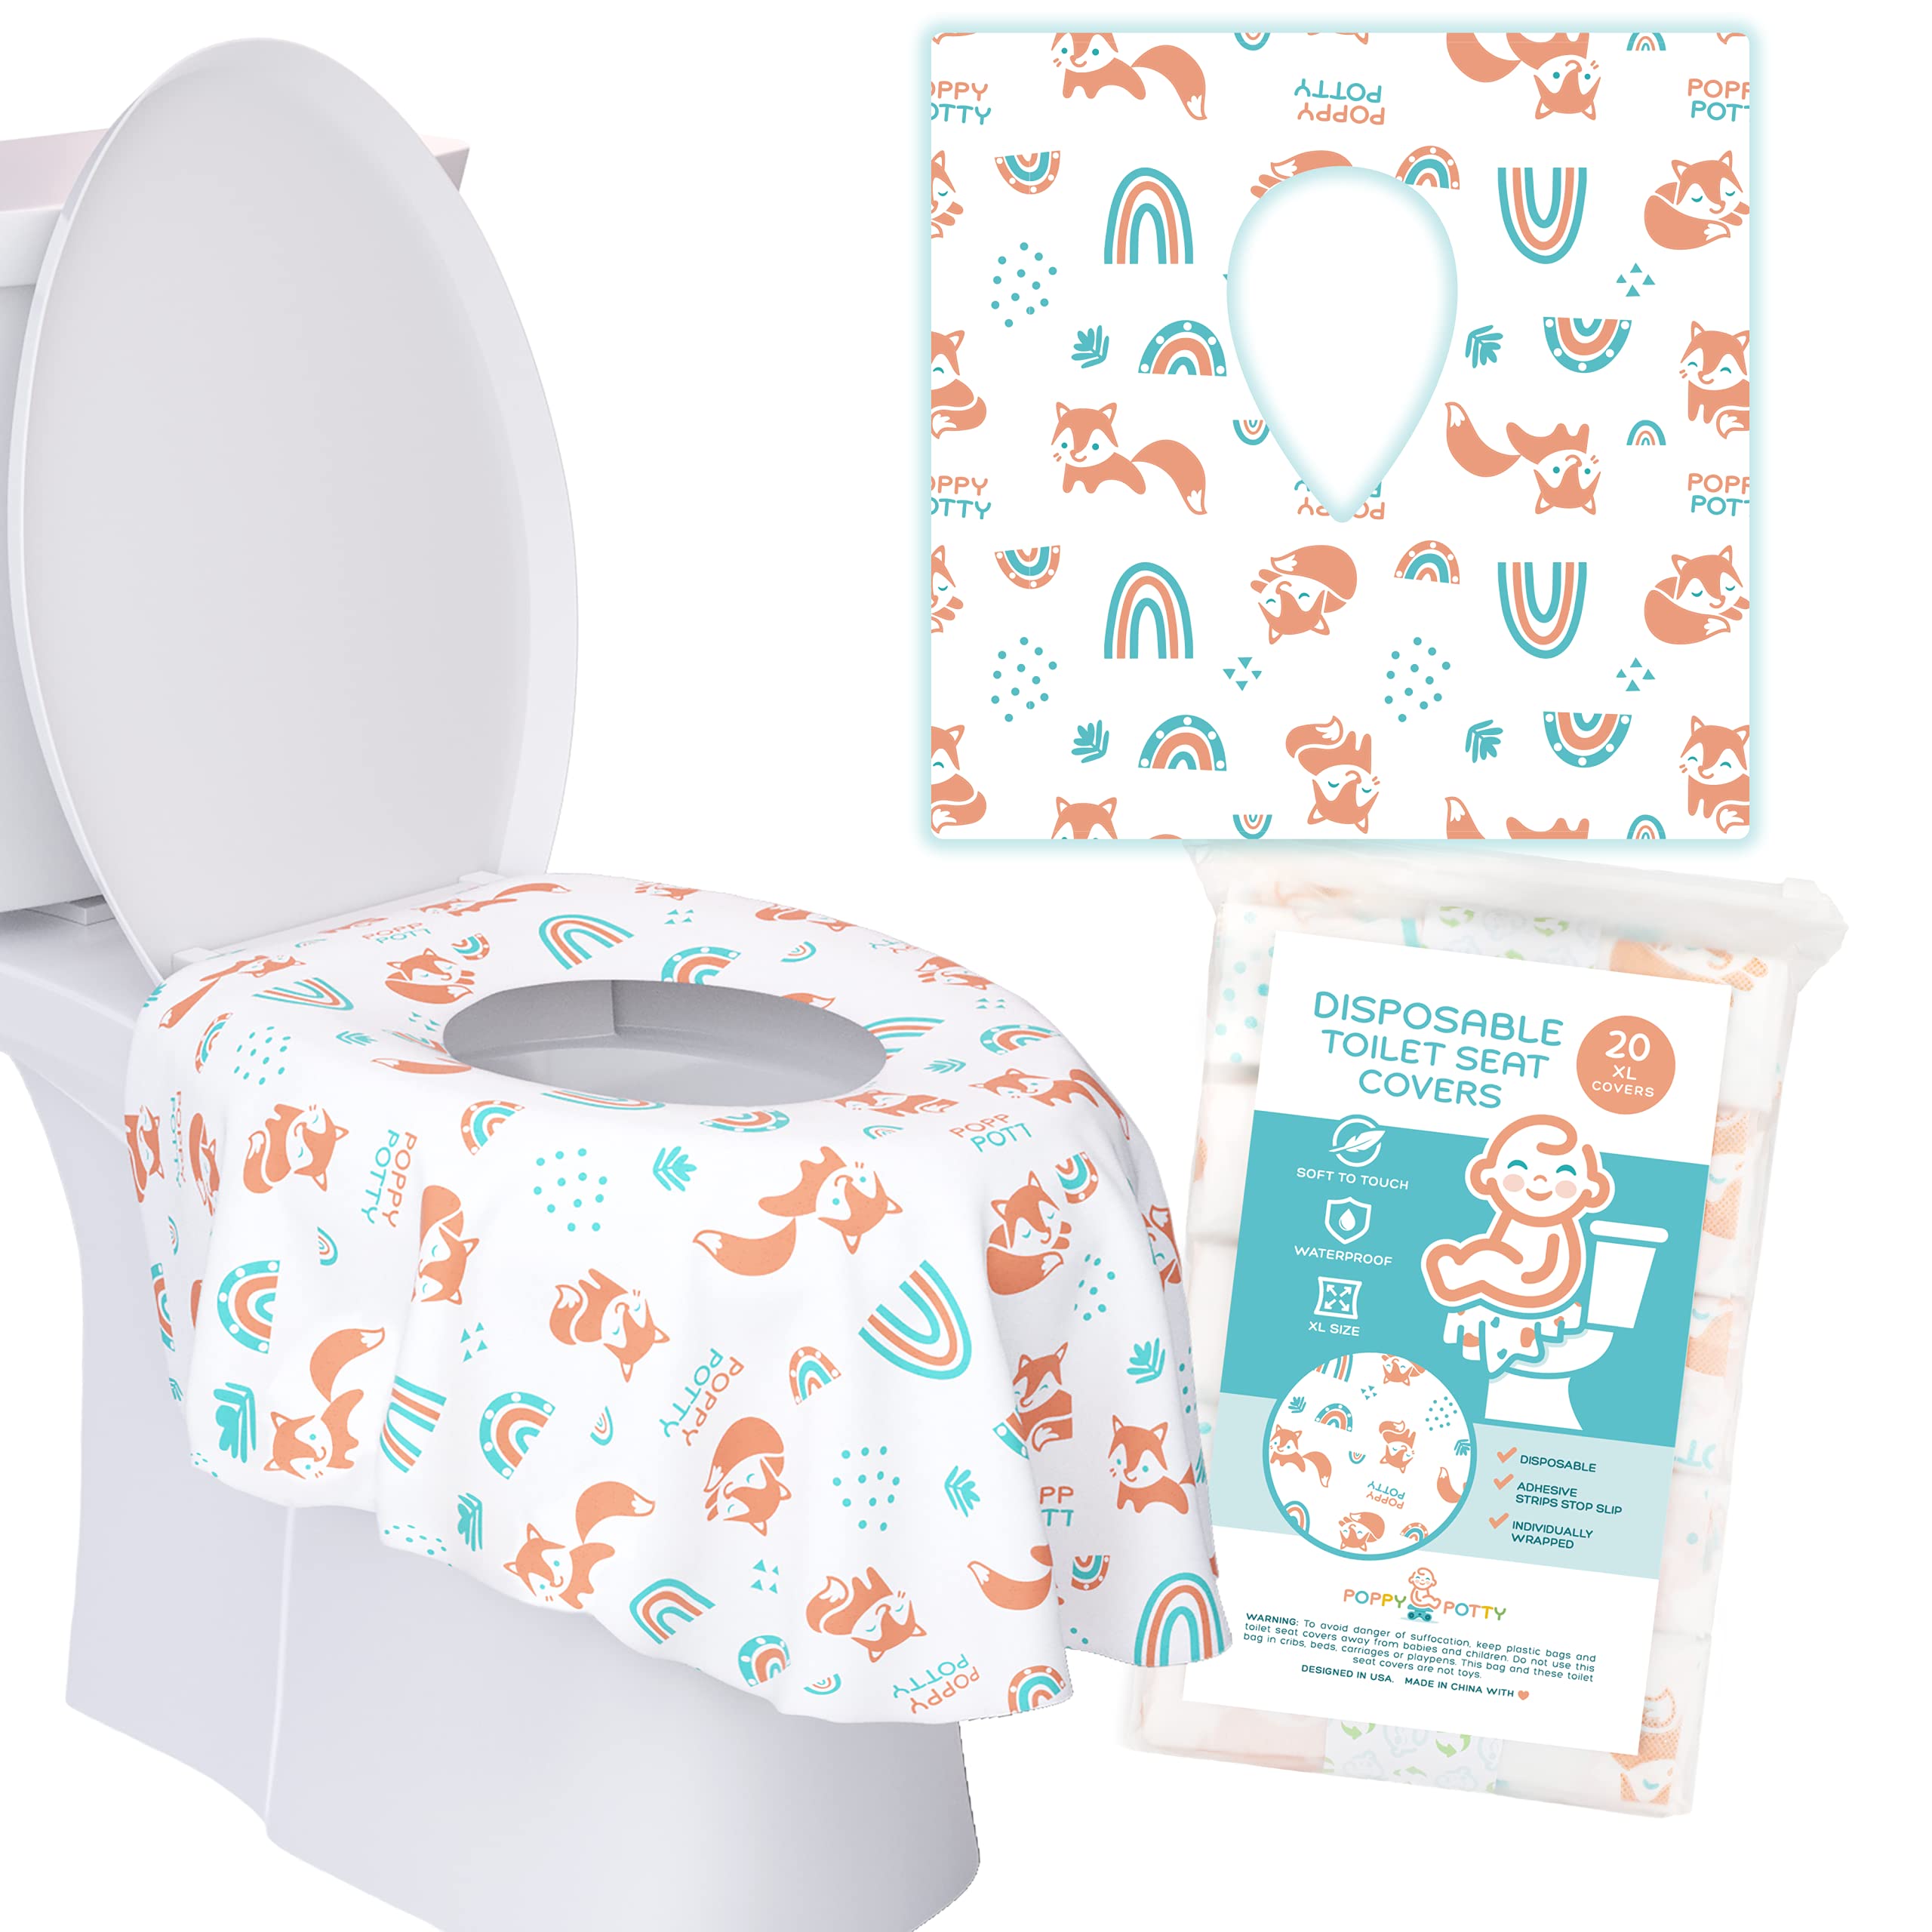 toilet seat cover for babies Toilet seat cover hygienic disposable printed est days